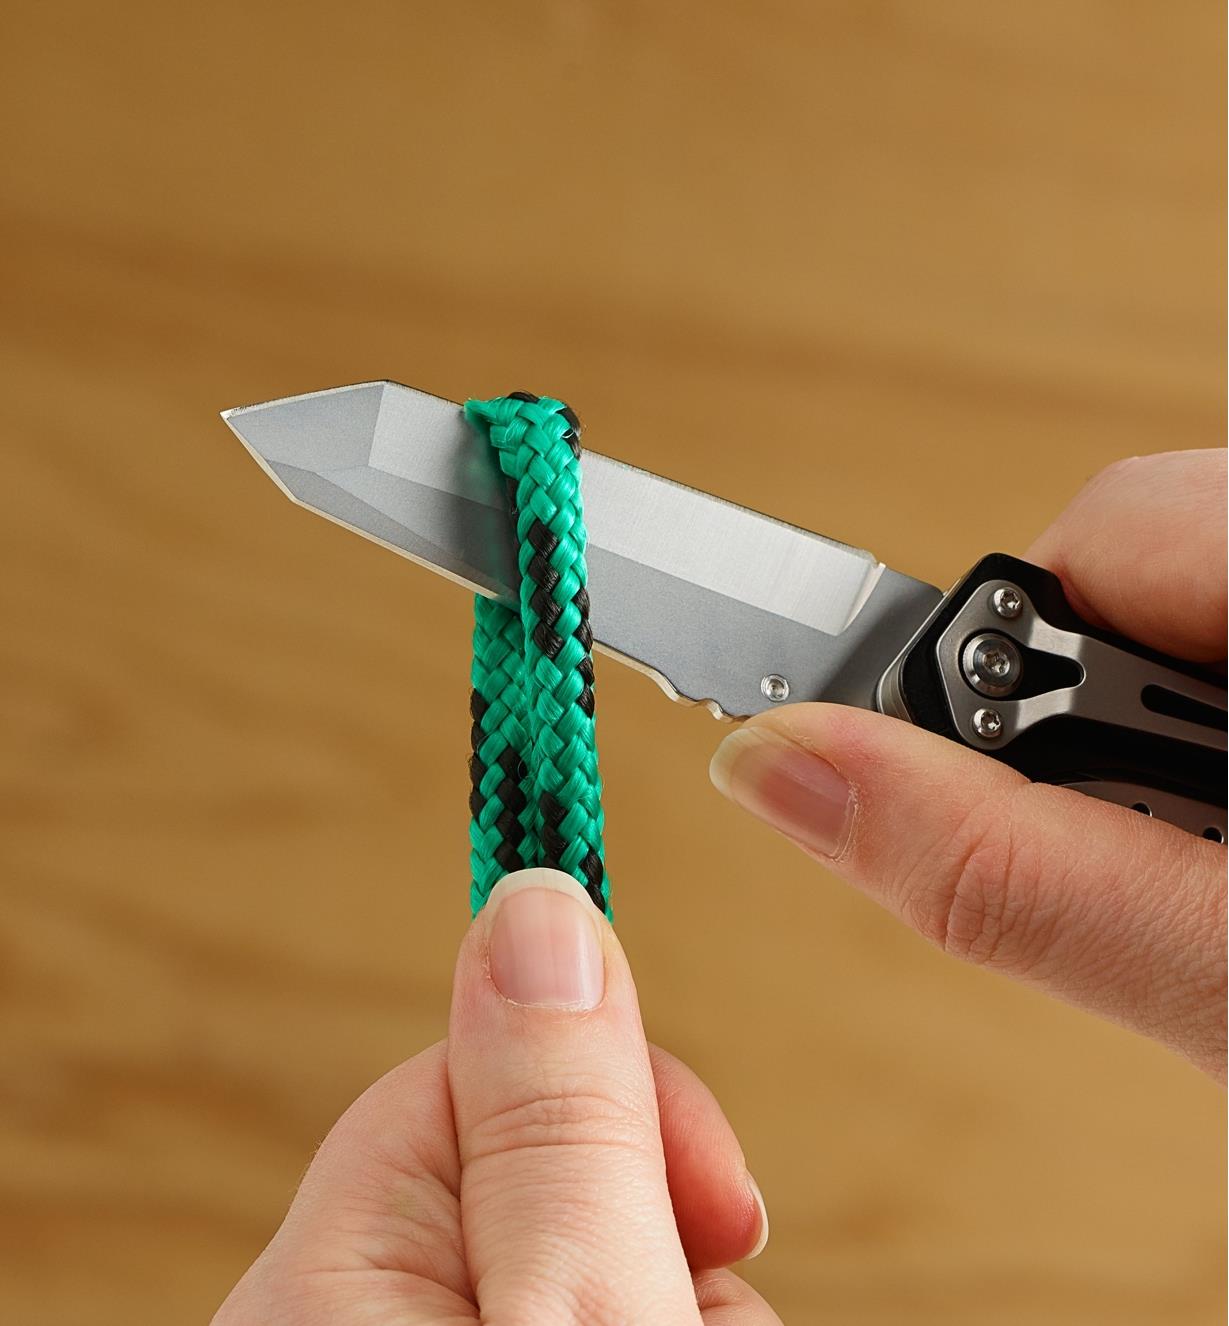 Multi-tool knife cutting a length of rope